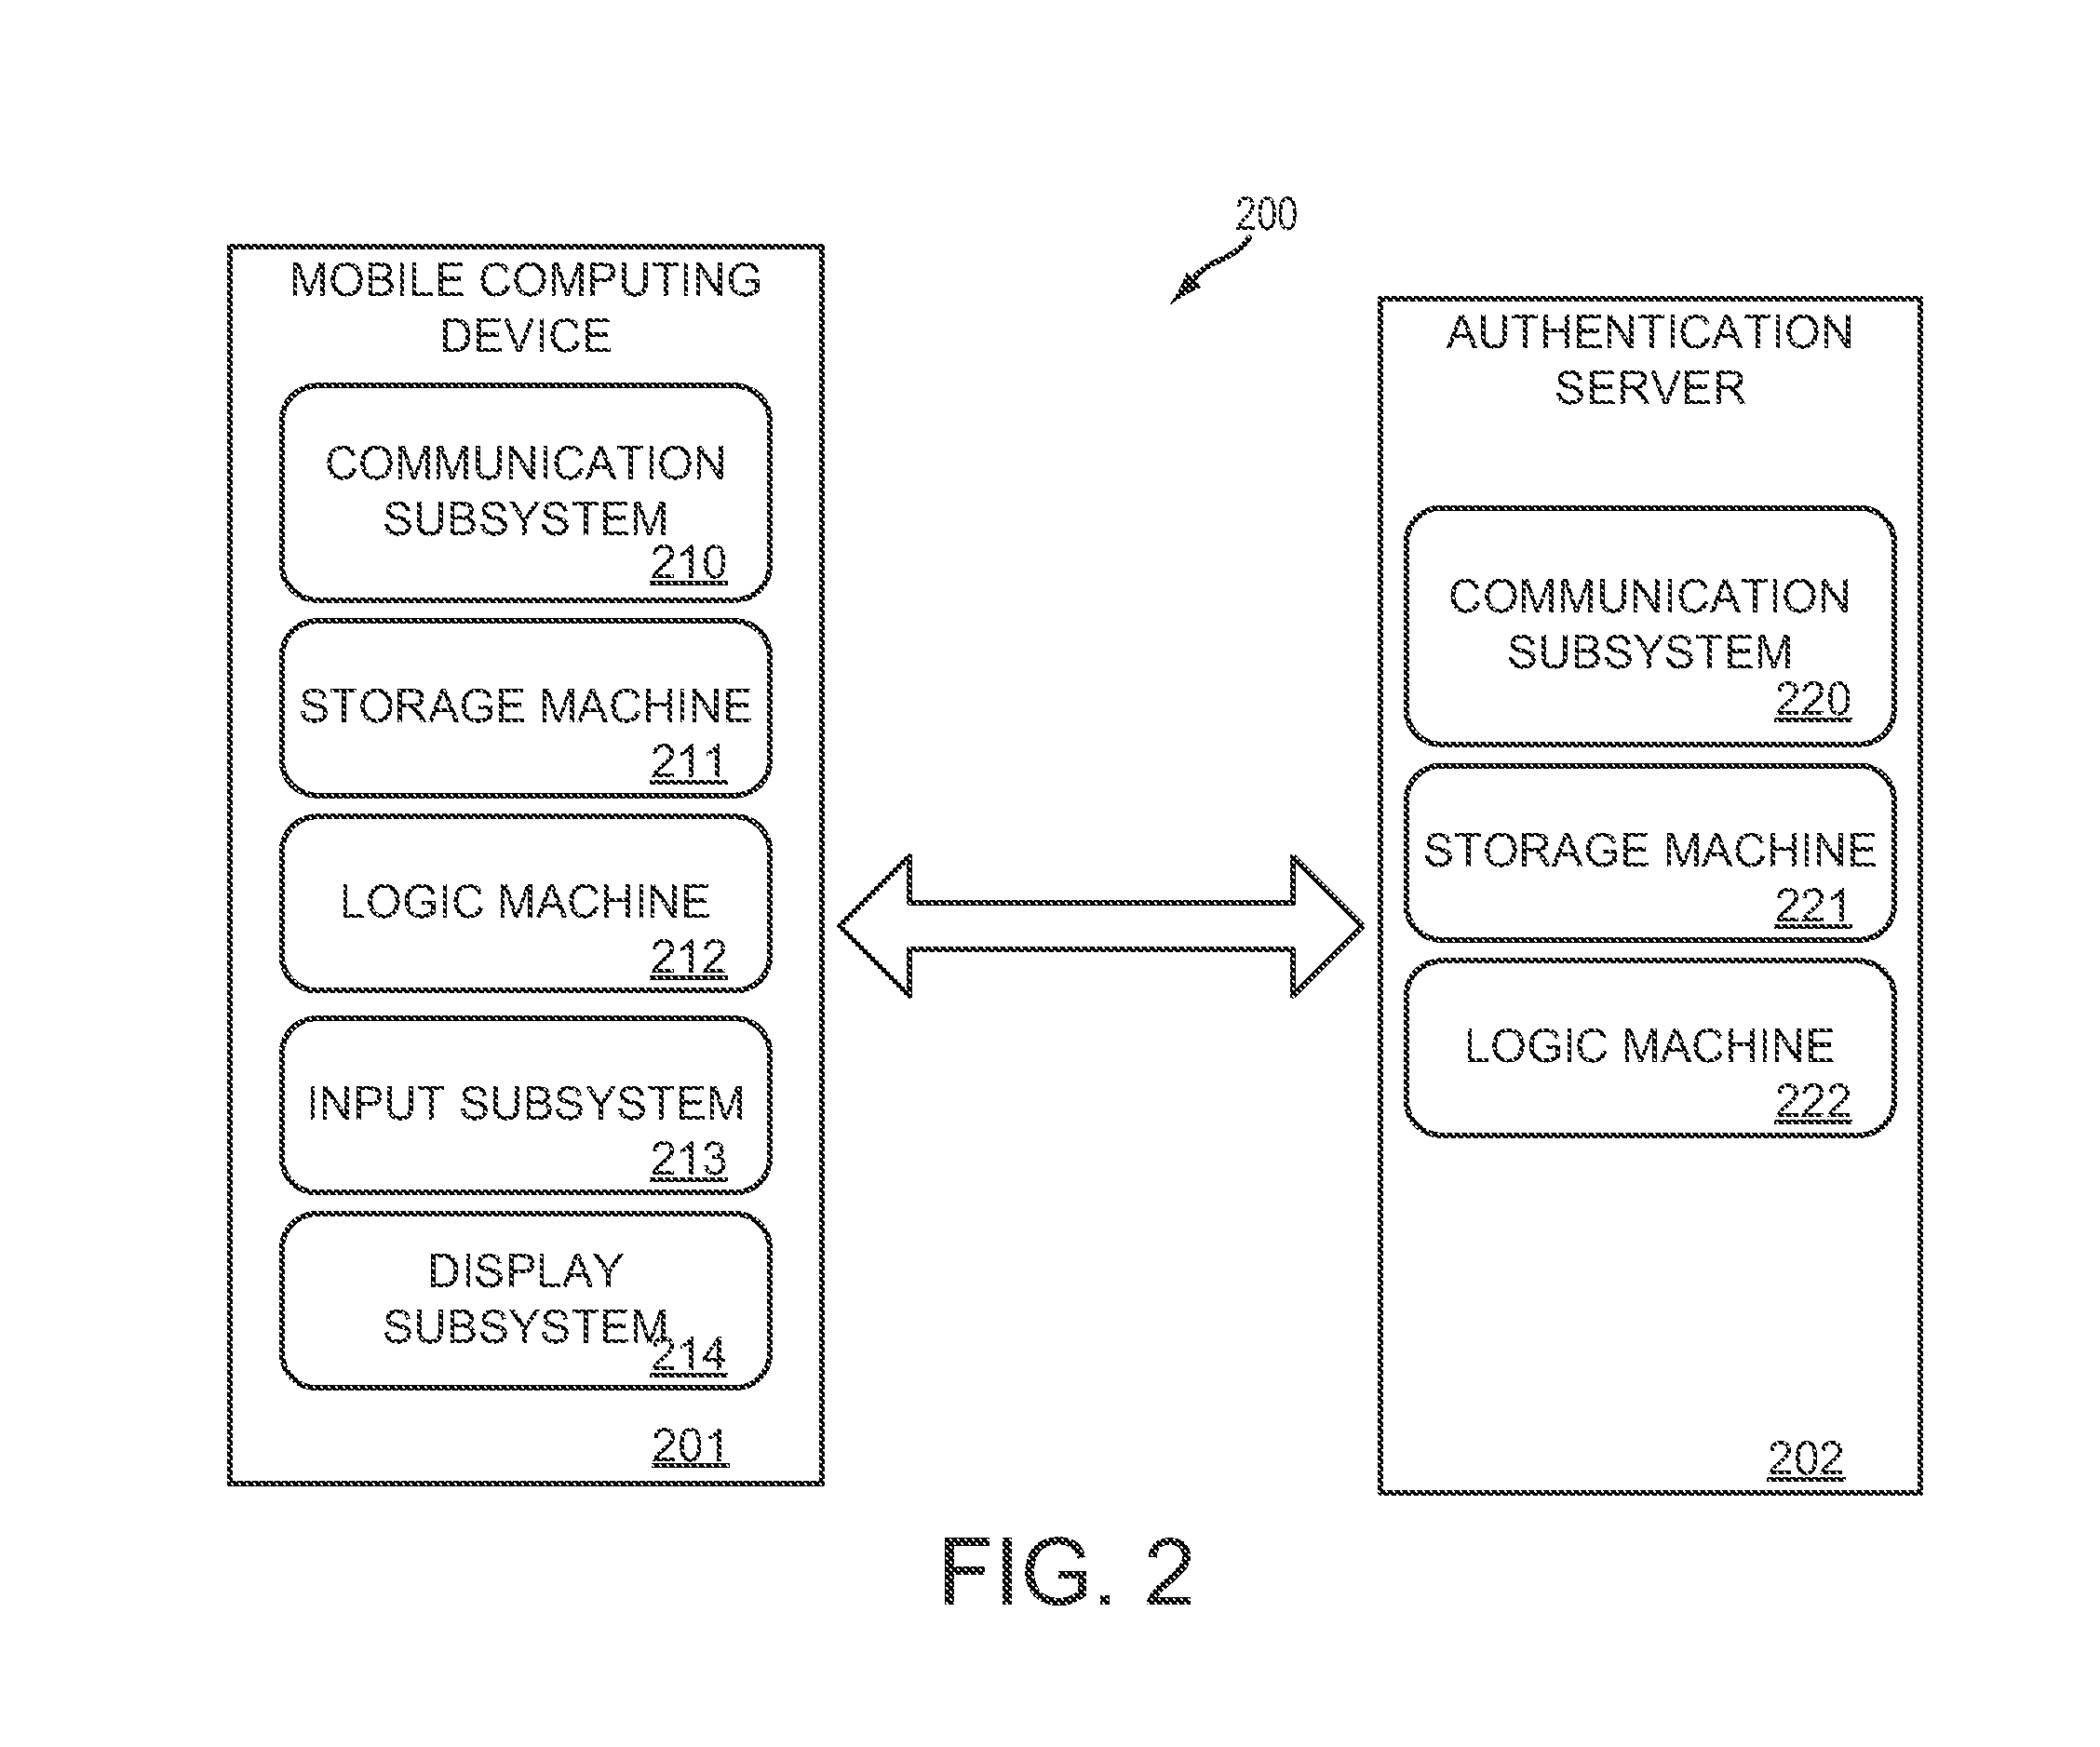 System and methods for one-time password generation on a mobile computing device